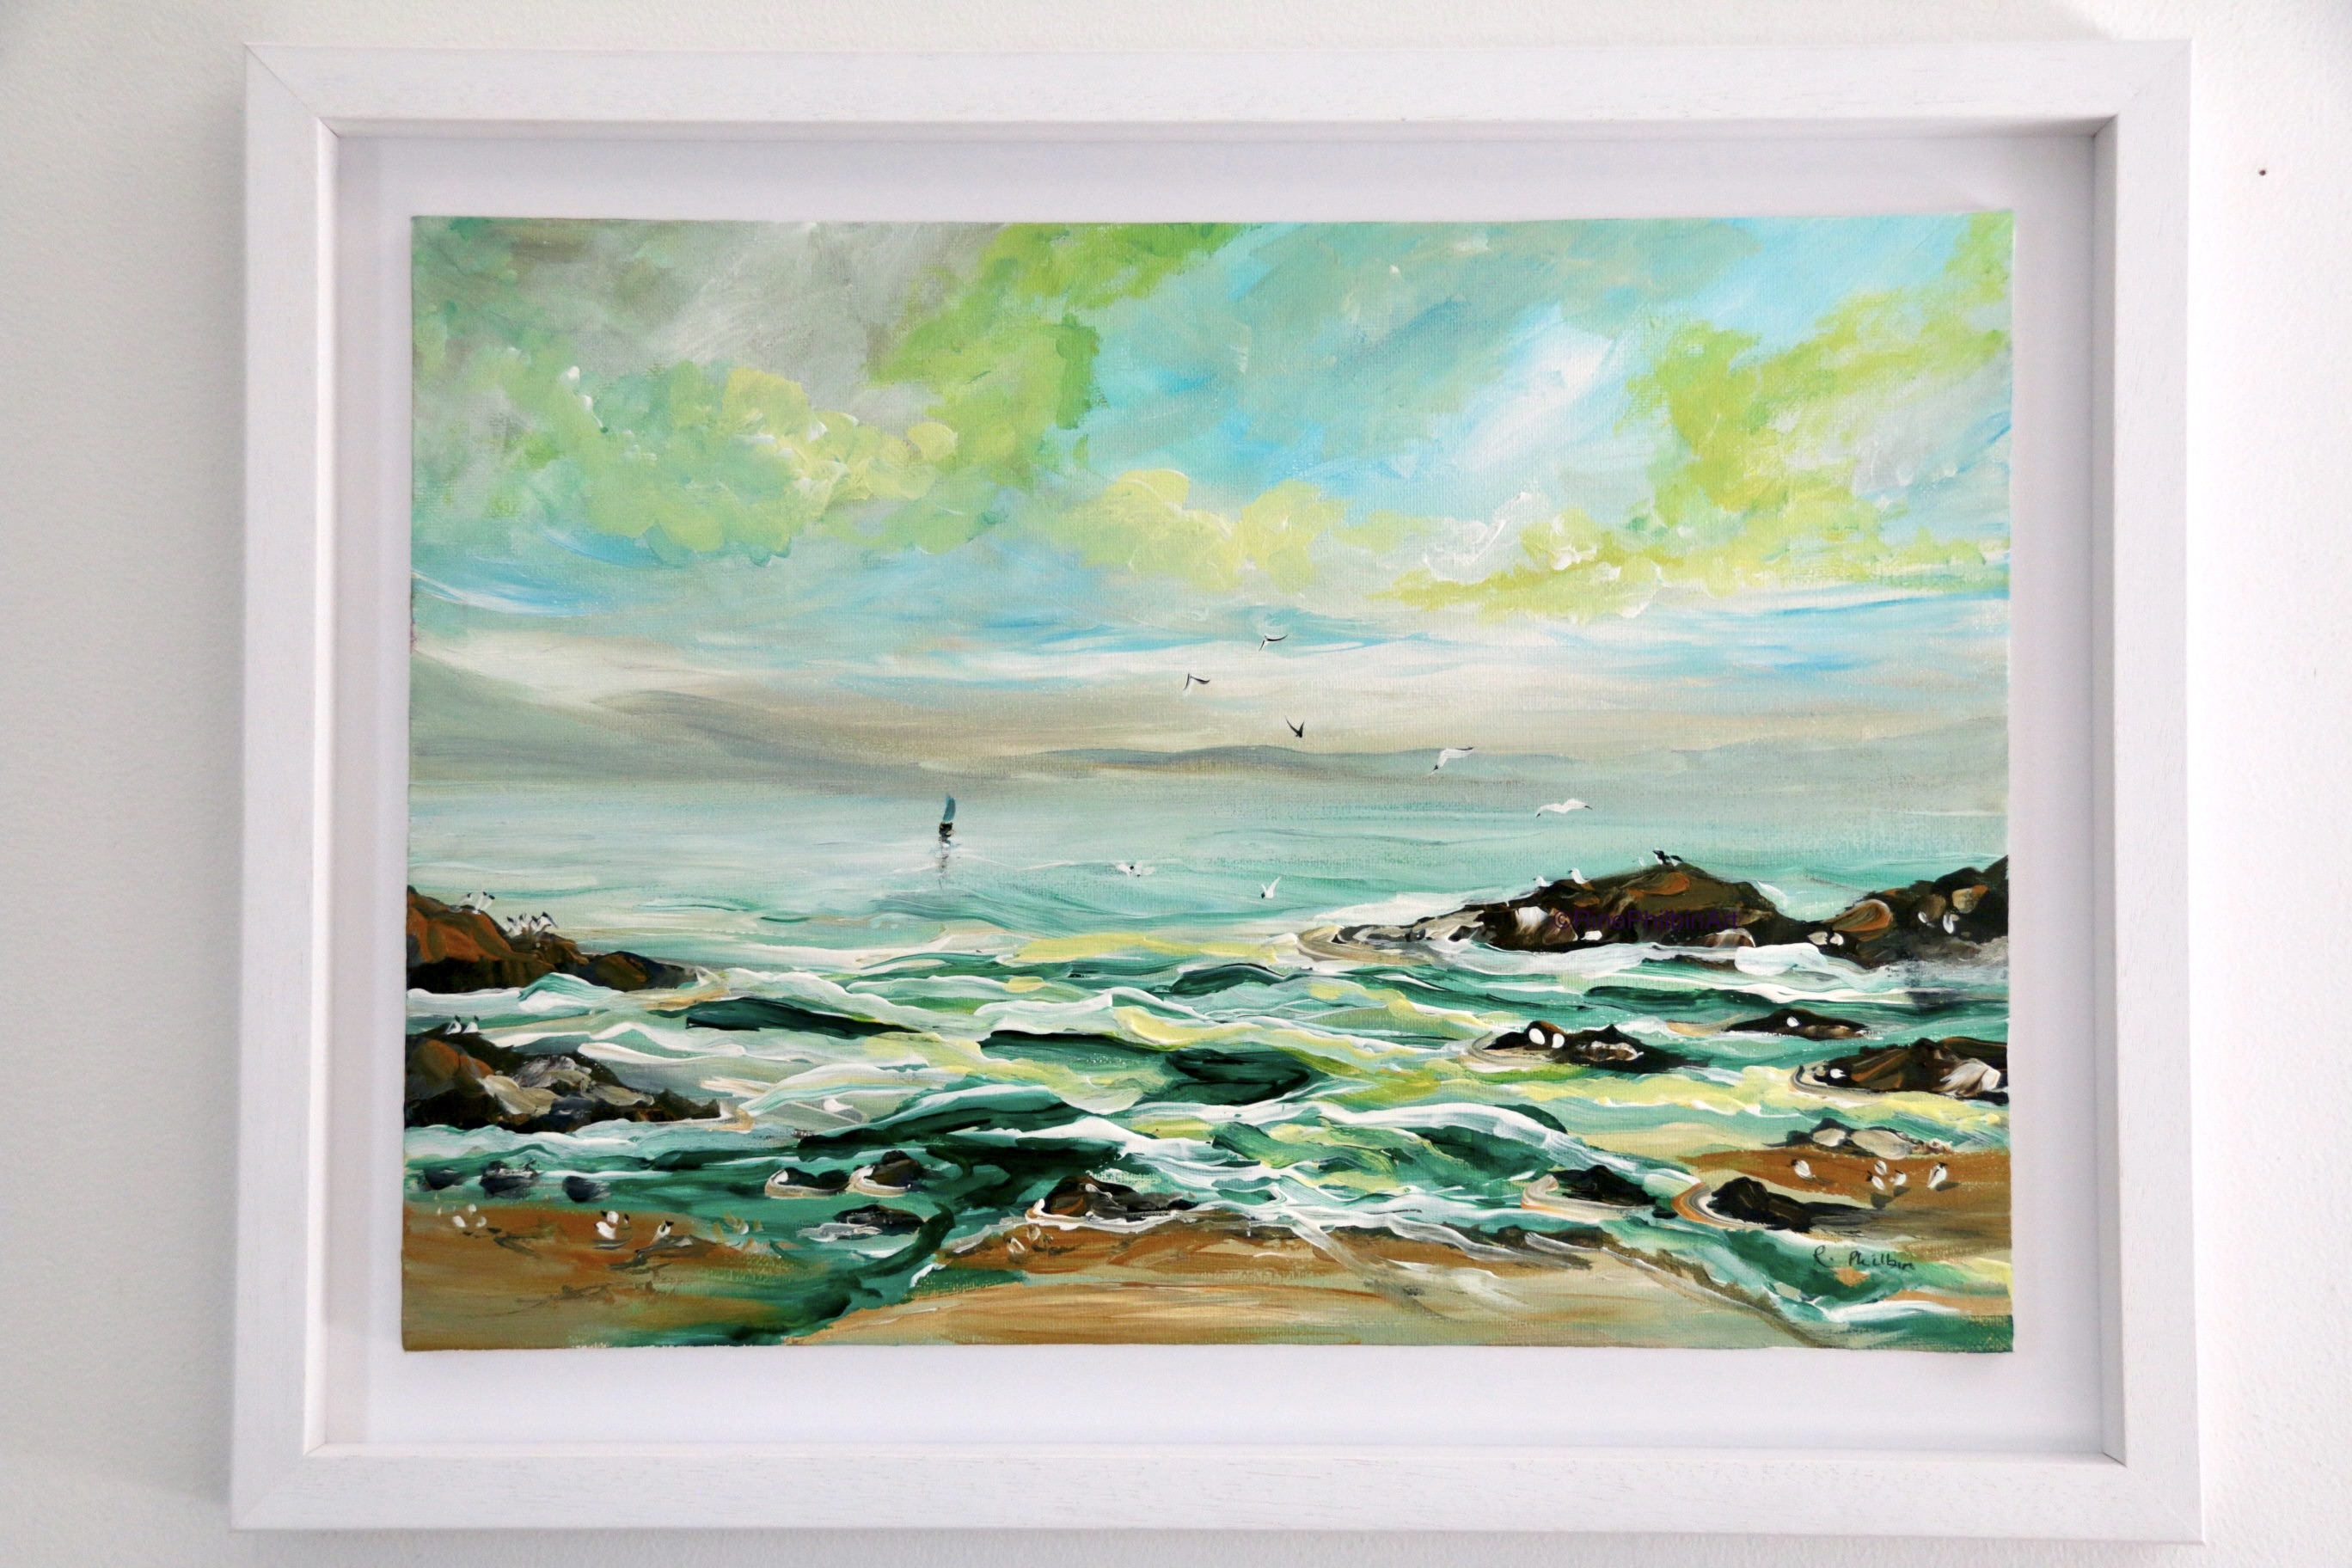 Original seascape painting for sale by galway artist. Check out more of her art for sale on art4you.ie with delivery to your door